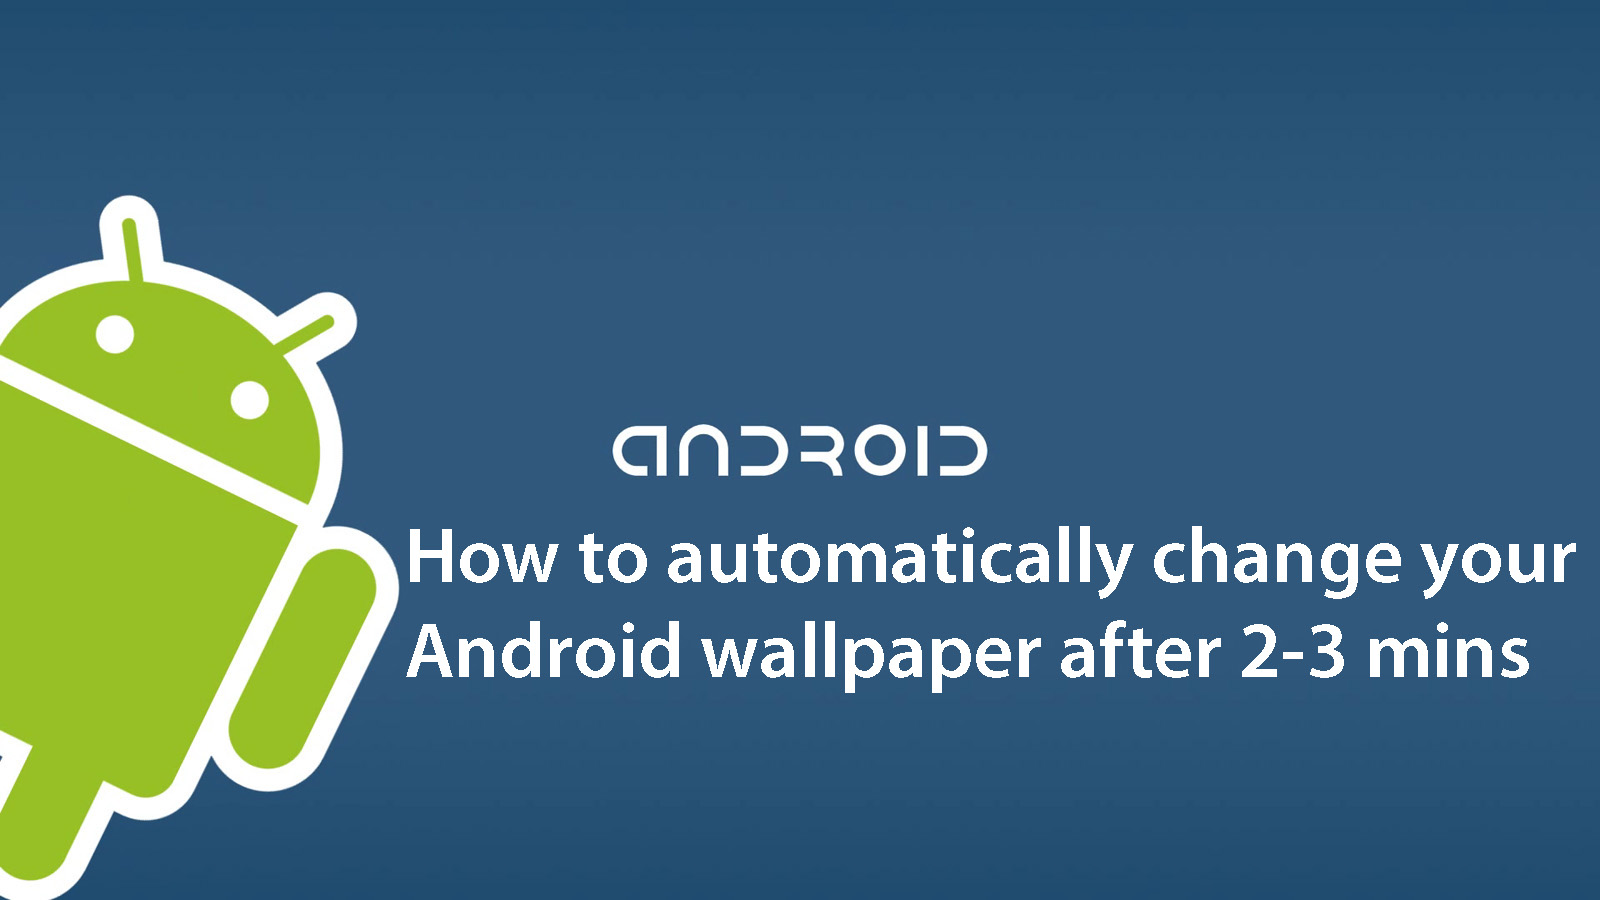 How to automatically change your Android wallpaper after 2-3 mins